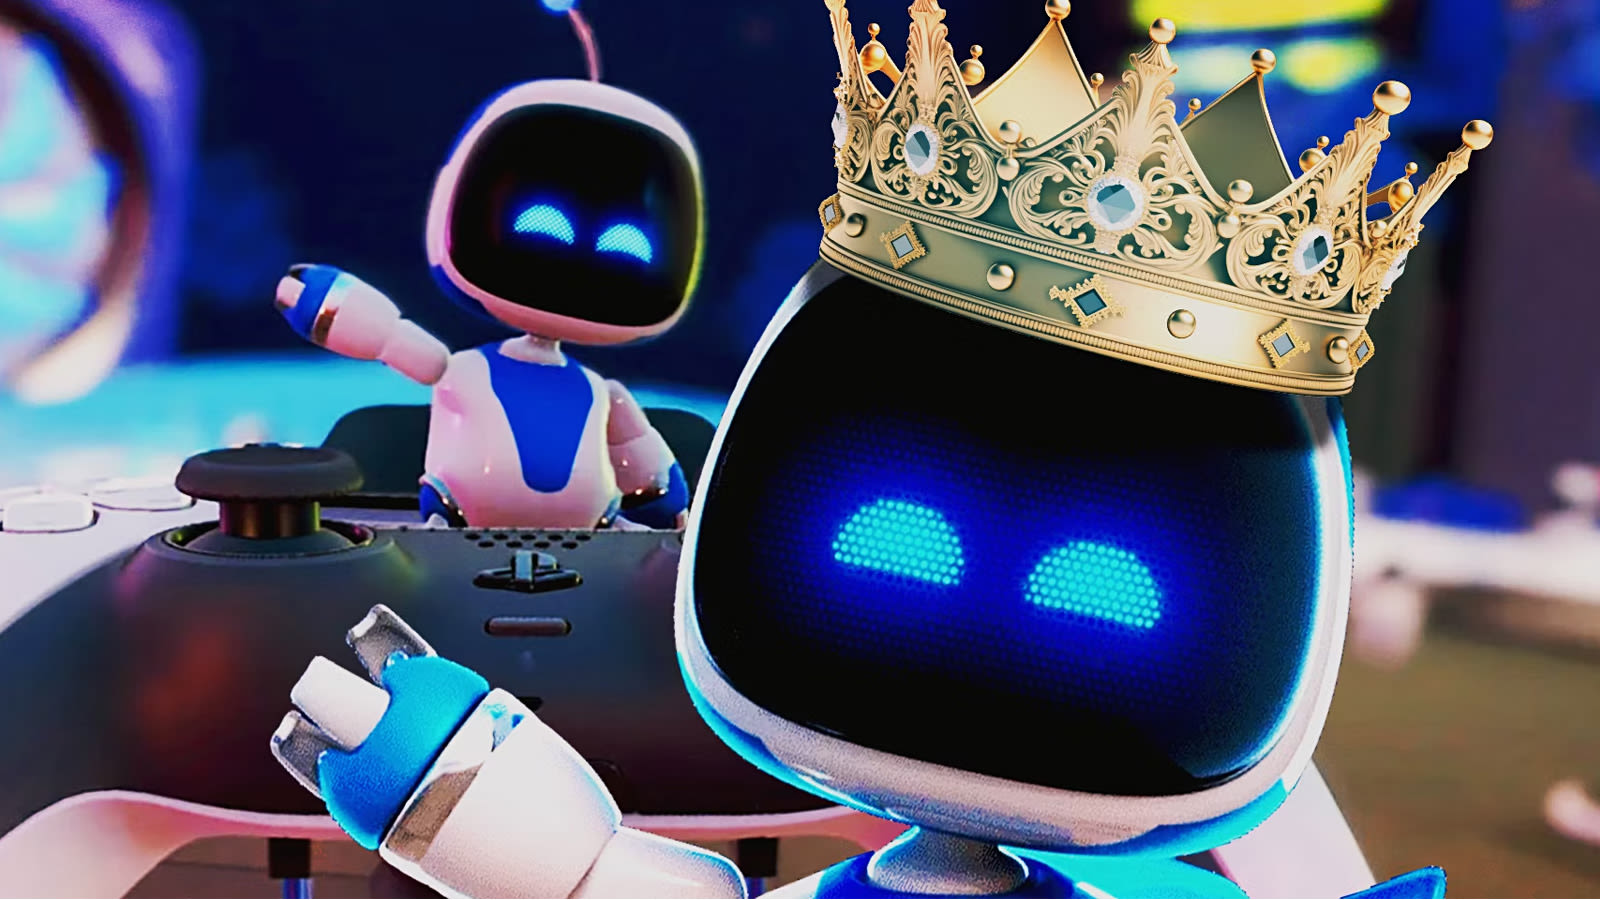 Astro Bot Series Reveal Reportedly Coming Soon as May PlayStation Showcase Rumors Persist